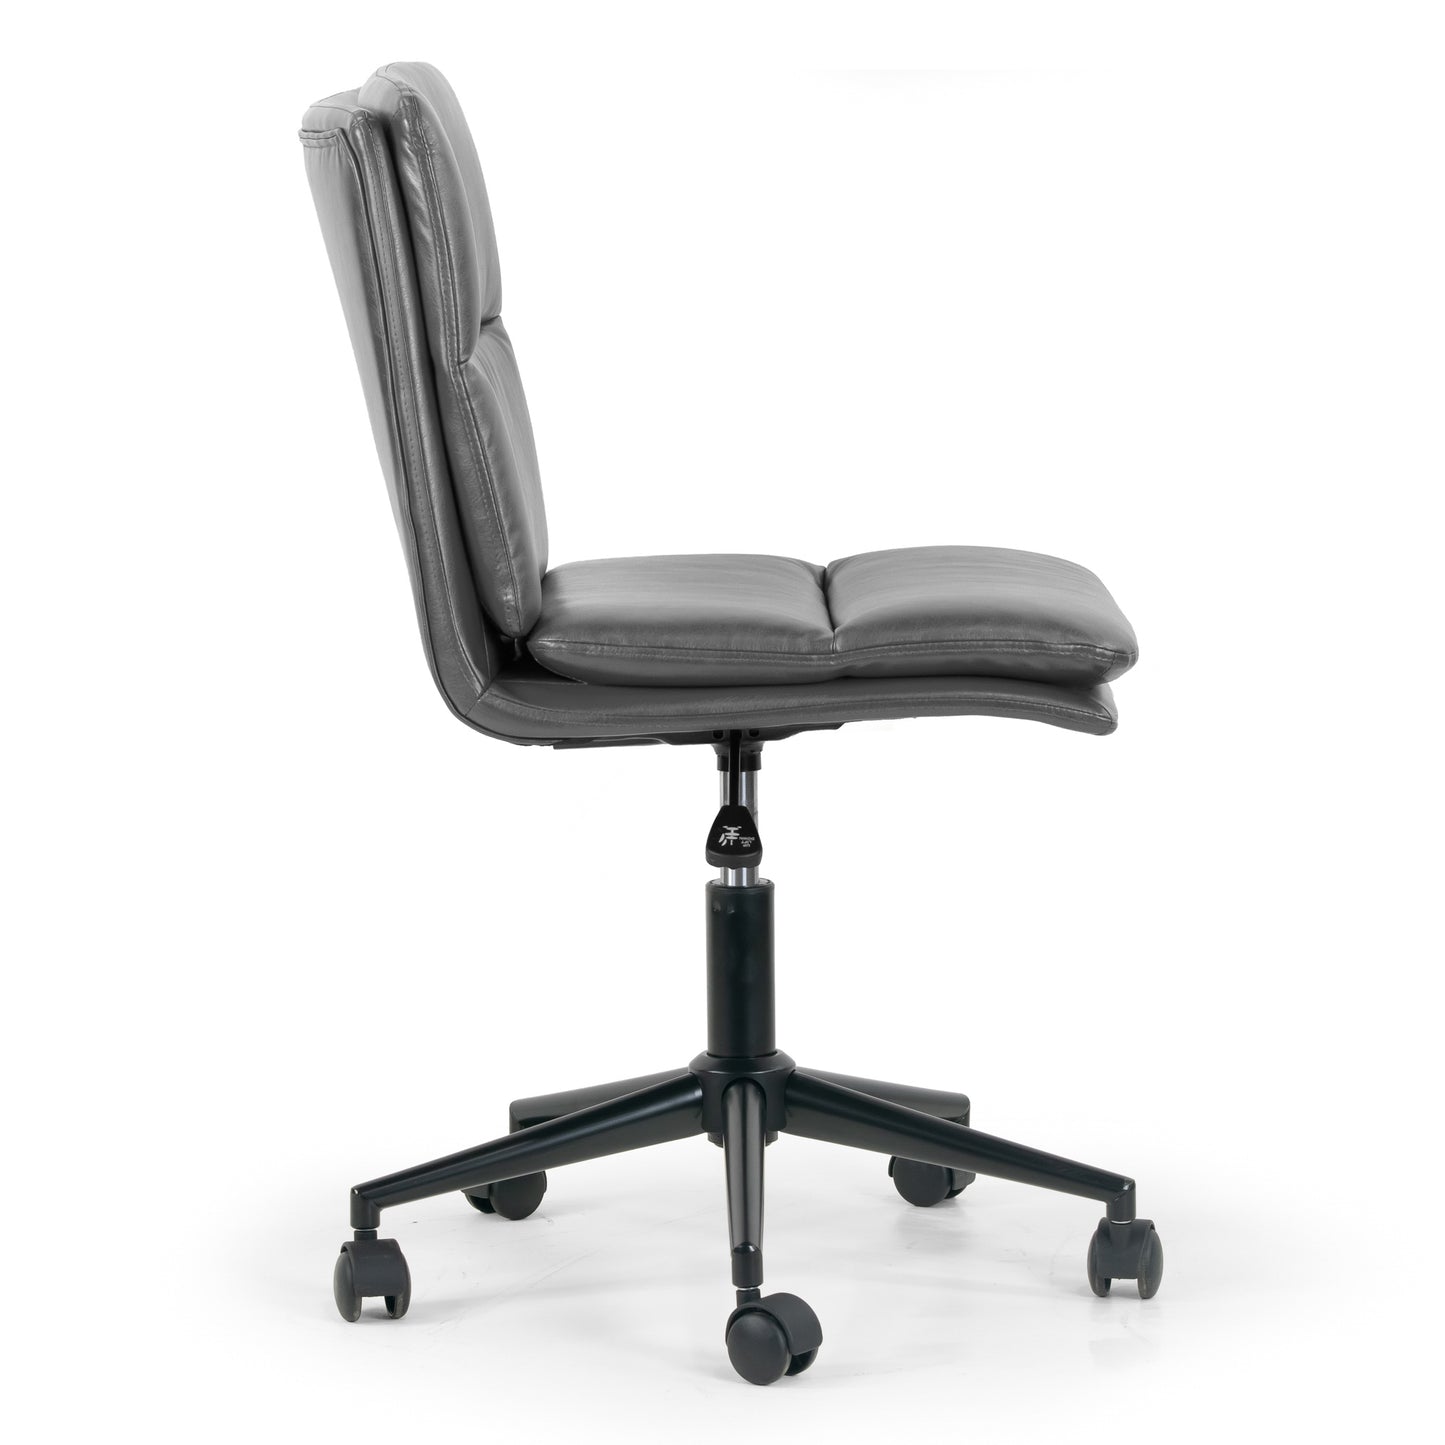 Avak Grey Faux Leather Adjustable Height Swivel Office Chair